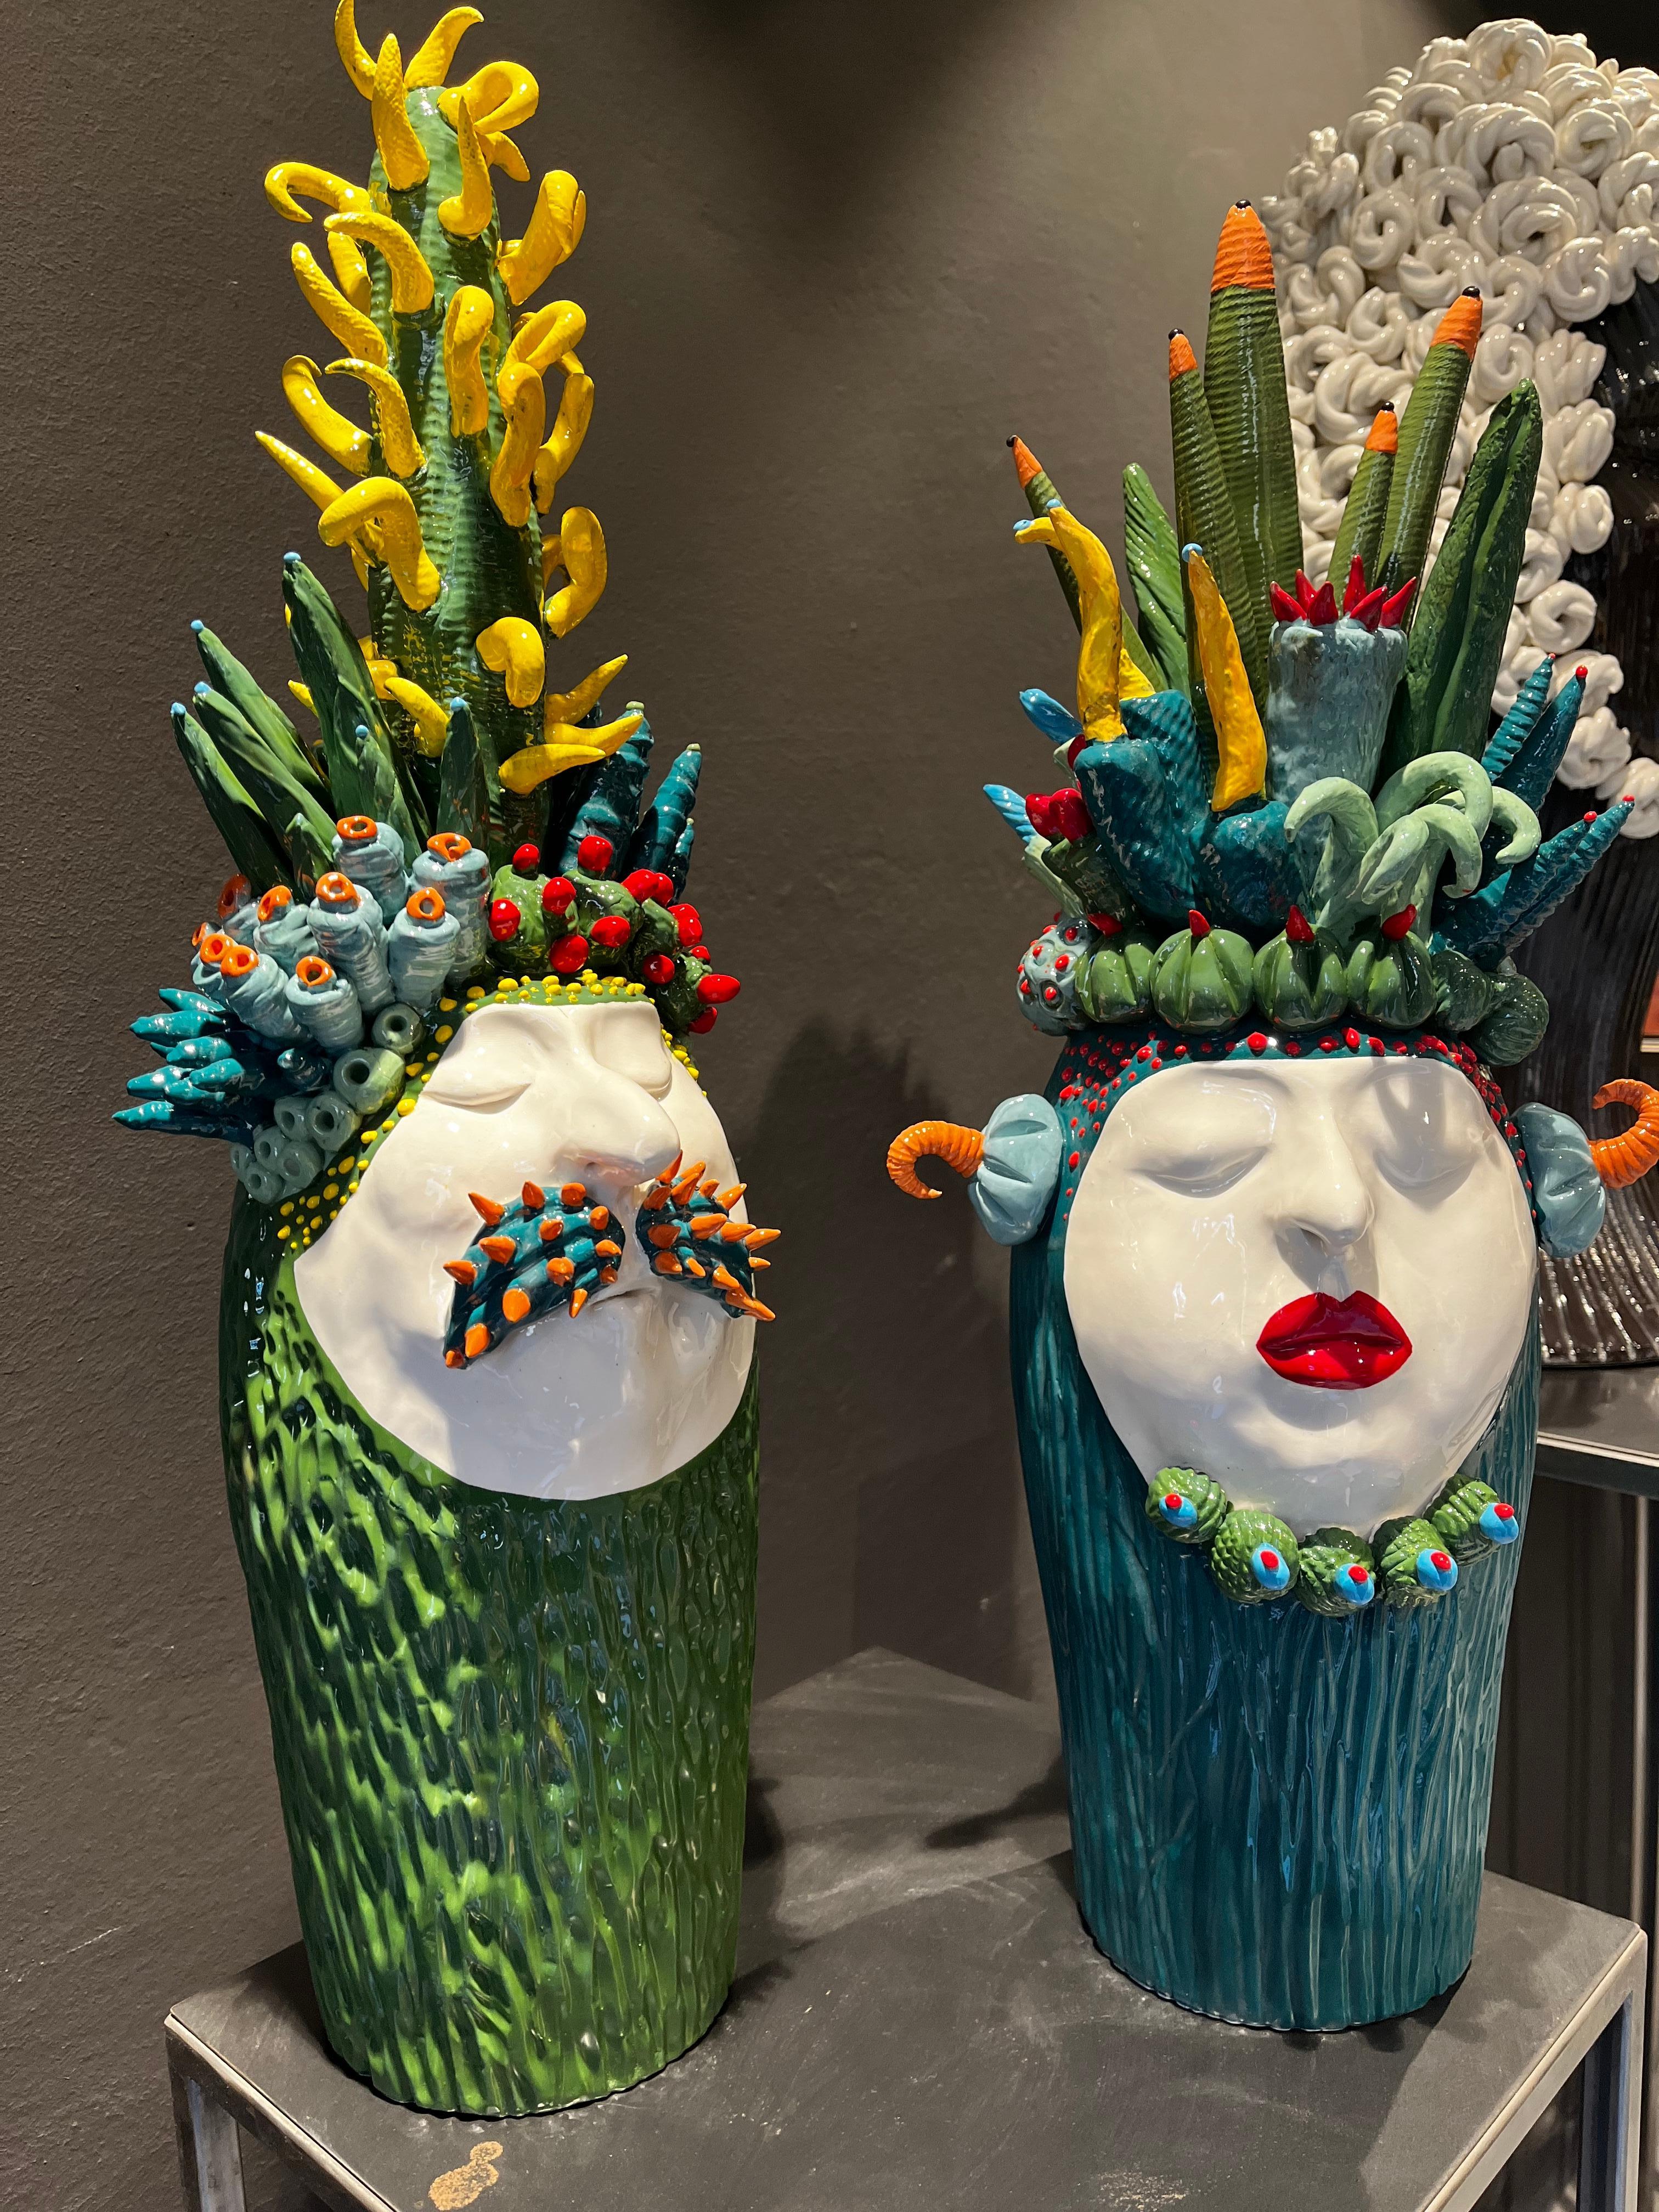 The pieces are a unique representation created by our designer. The two heads represents a man and a woman with naturalistic character, in a satirical way.
The creations are completely made by hand.
Ceramic and paint are water resistant.
 